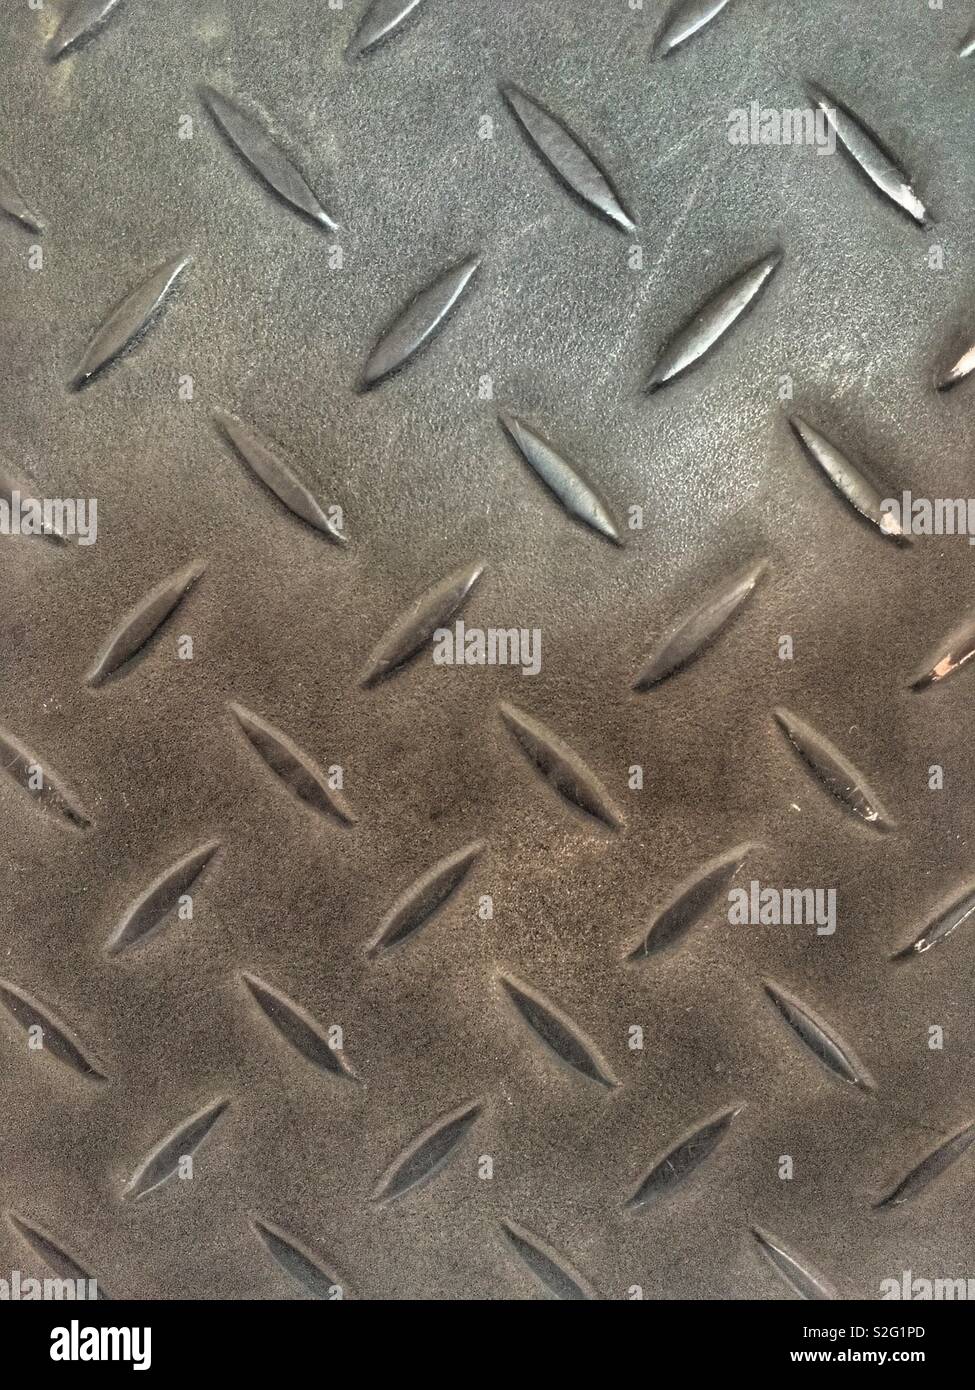 Industrial metal plate background Stock Photo